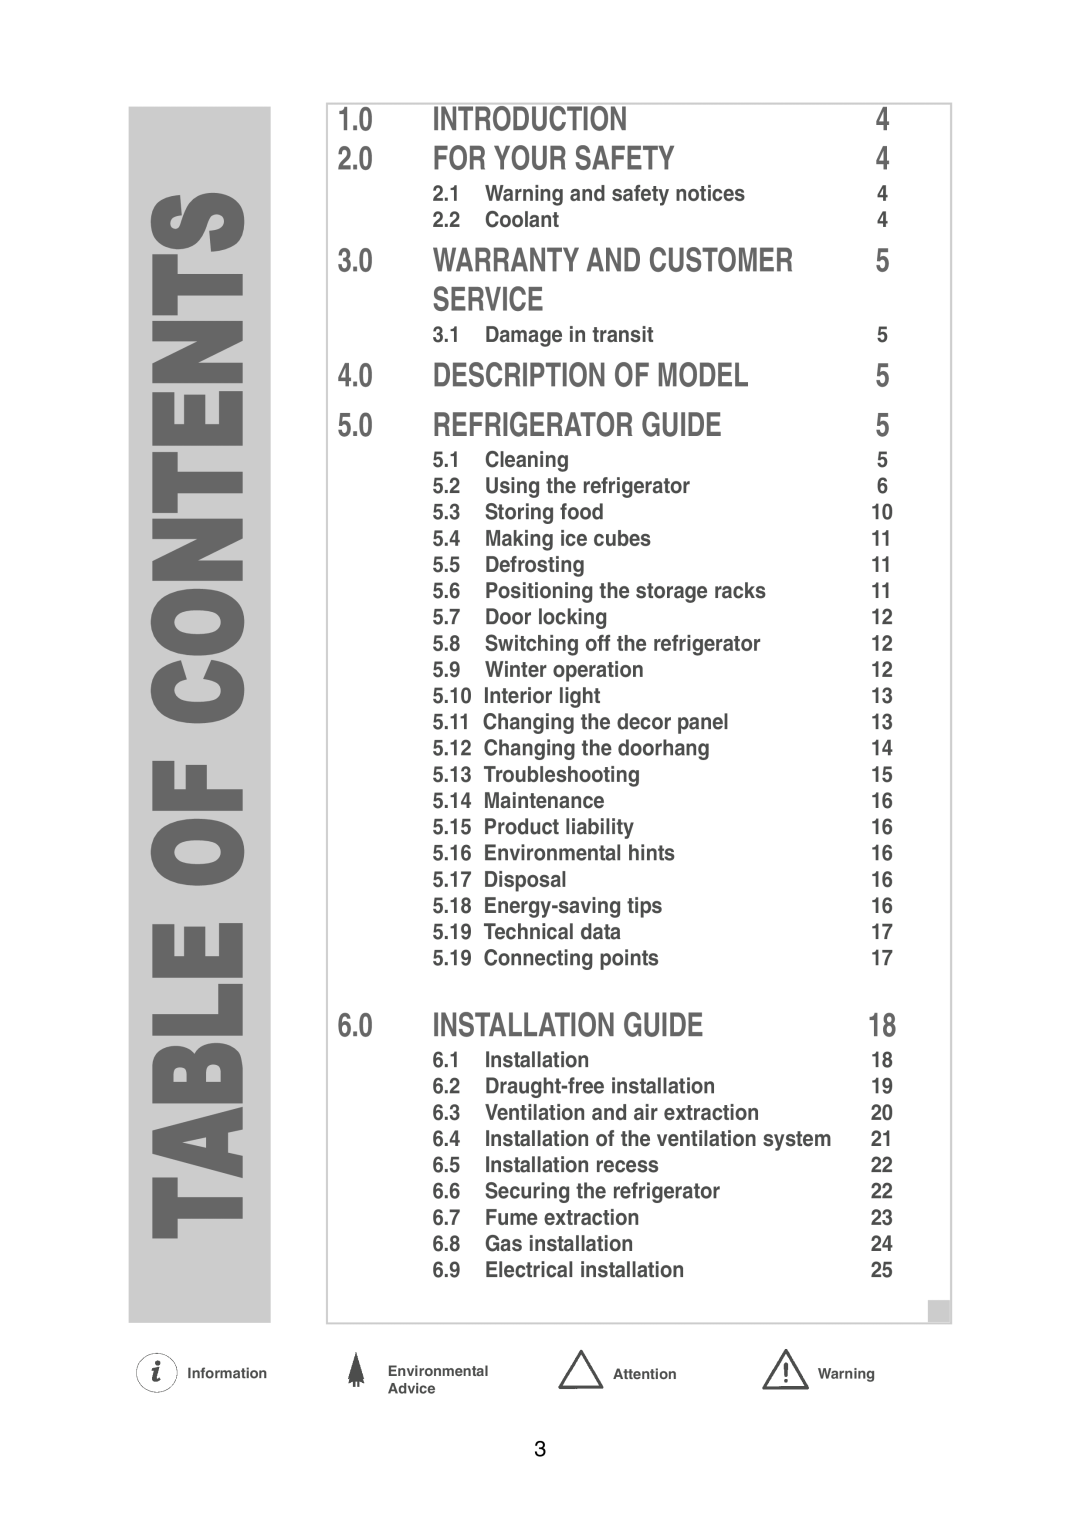 Dometic RM 7271 L Table Of Contents, Introduction, For Your Safety, Service, Description Of Model, Refrigerator Guide 